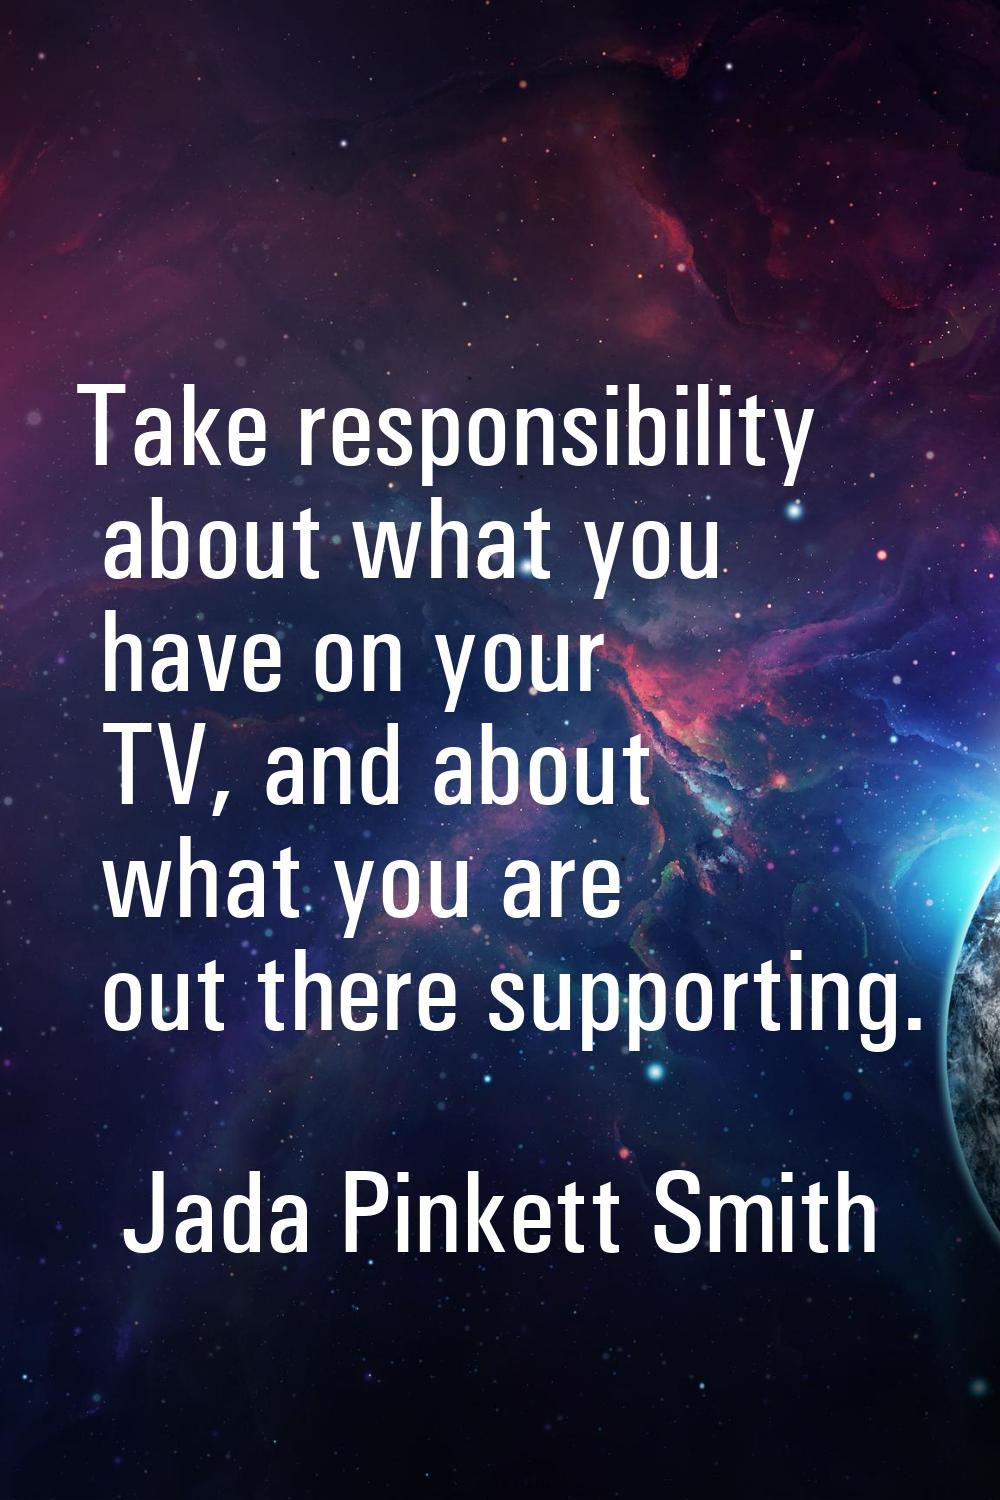 Take responsibility about what you have on your TV, and about what you are out there supporting.